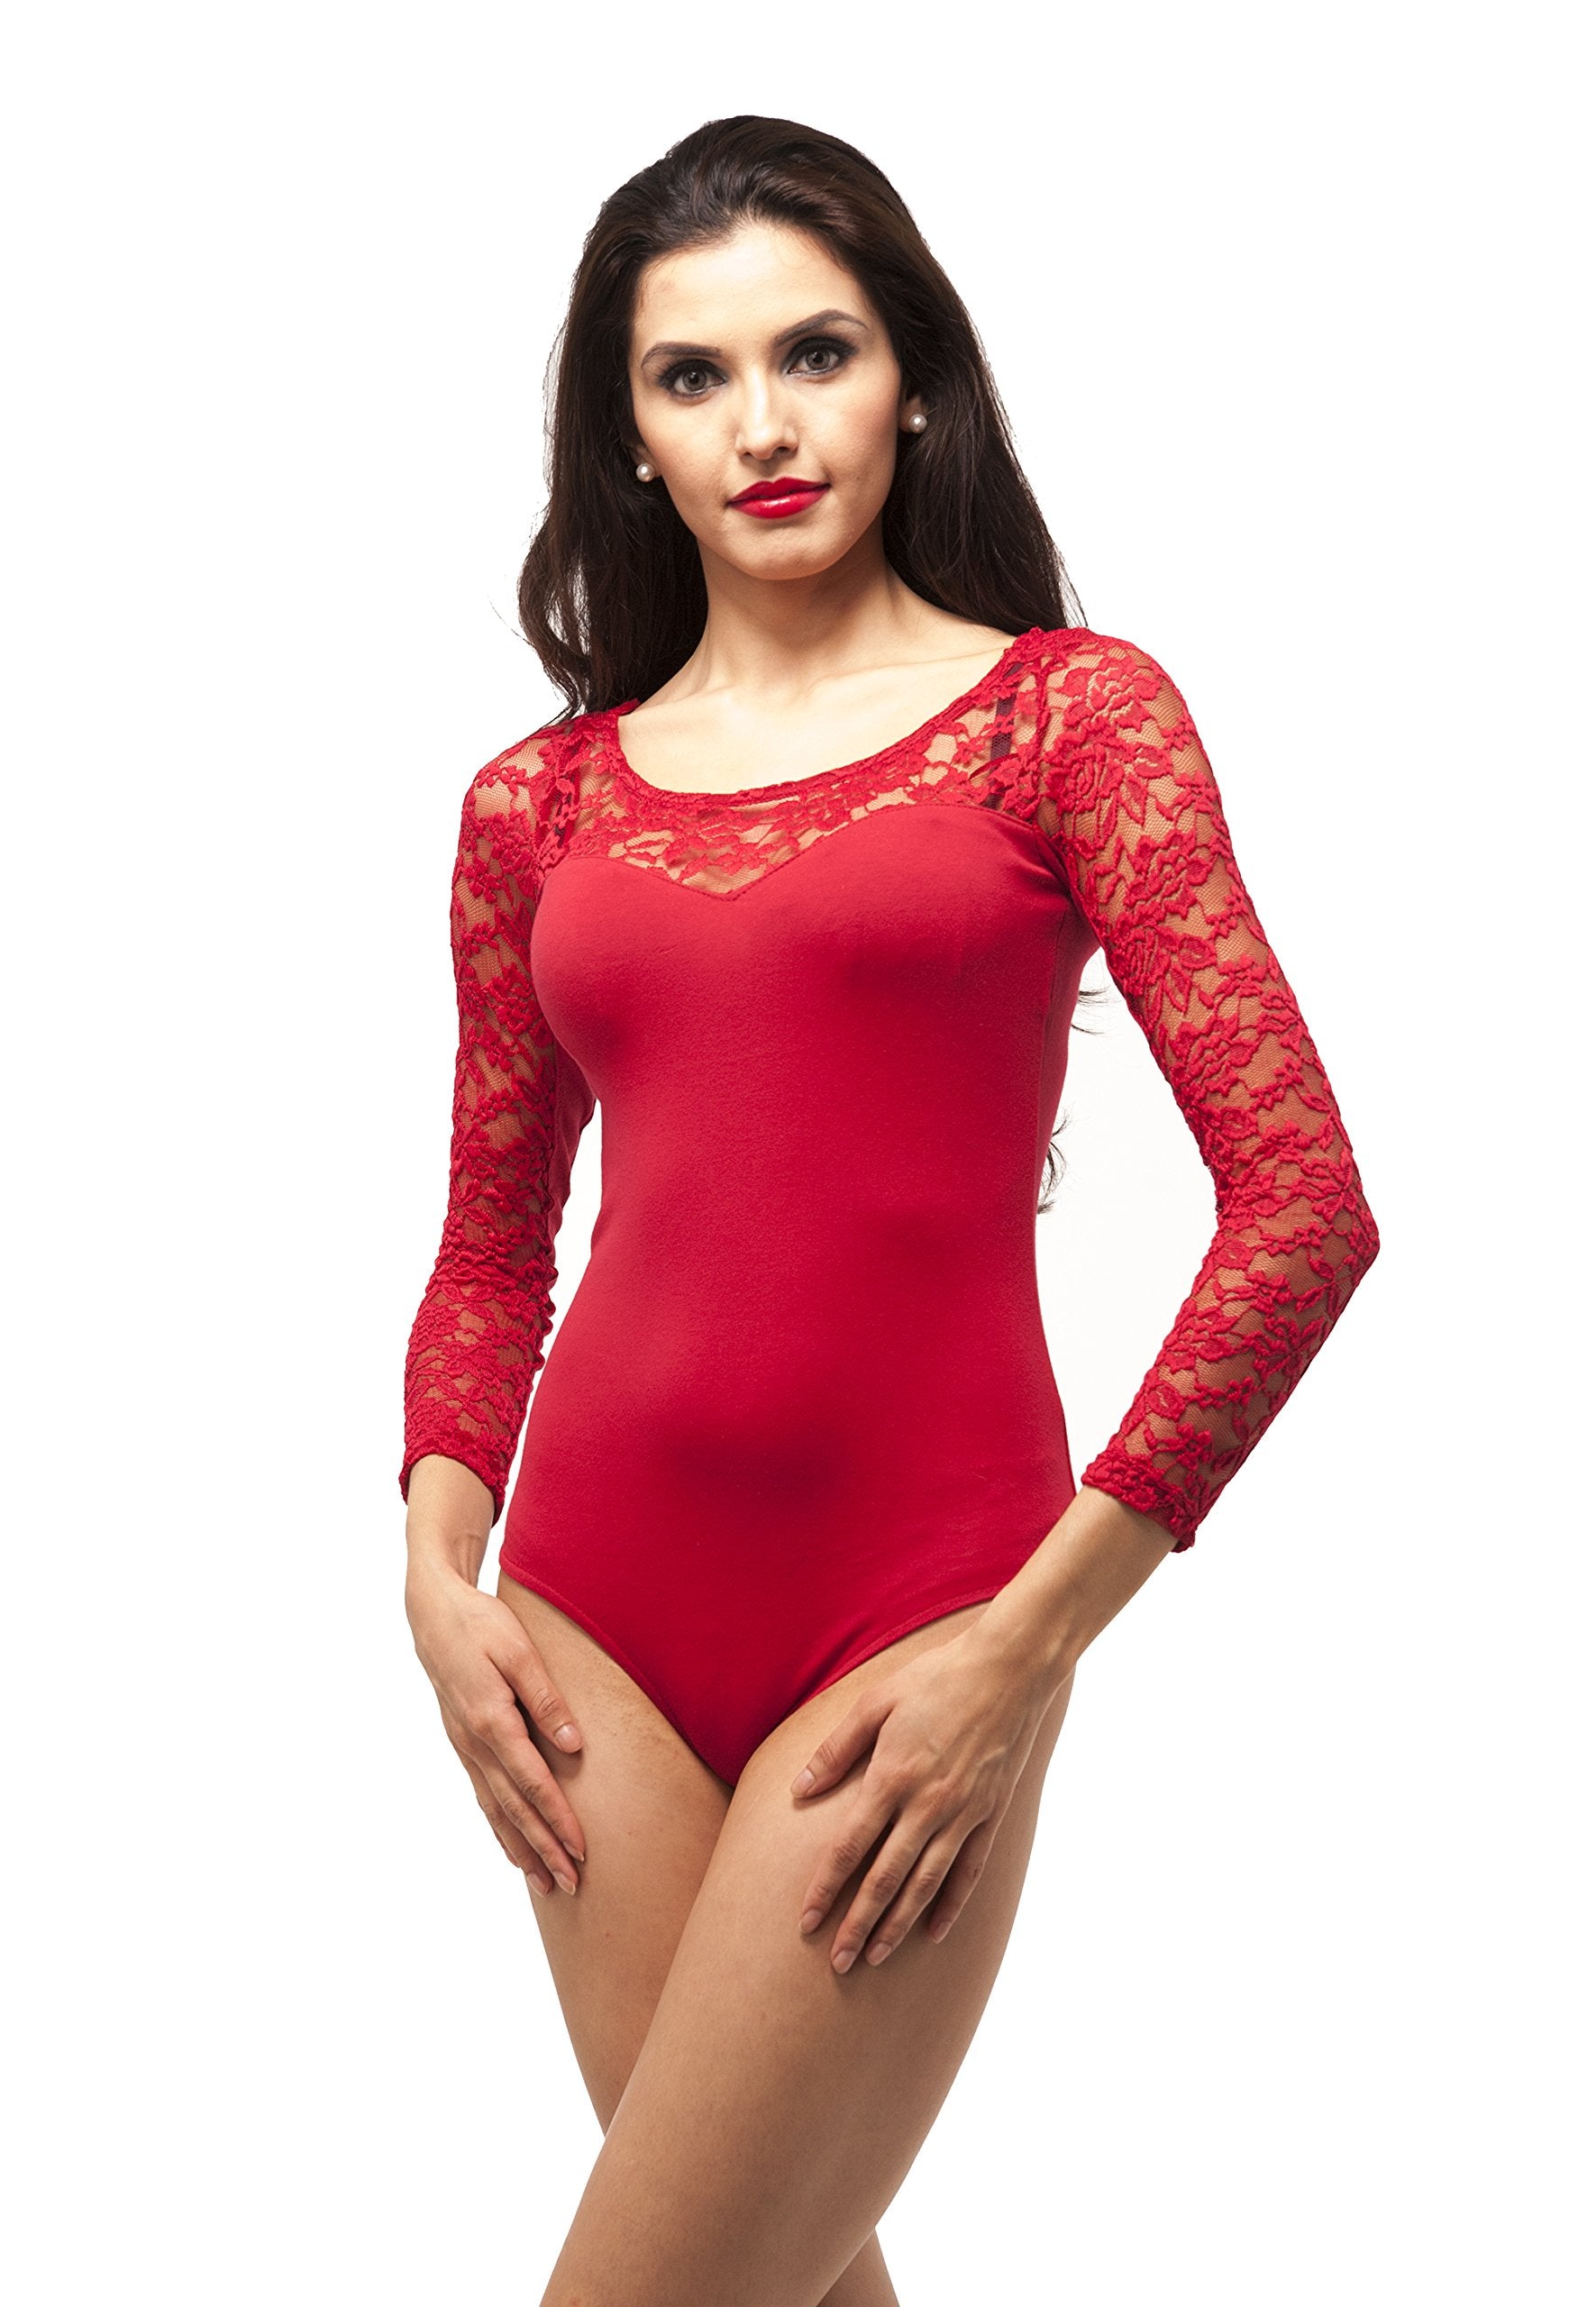 Hollywood Star Fashion Sweet Heart floral lace long sleeve leotard one piece